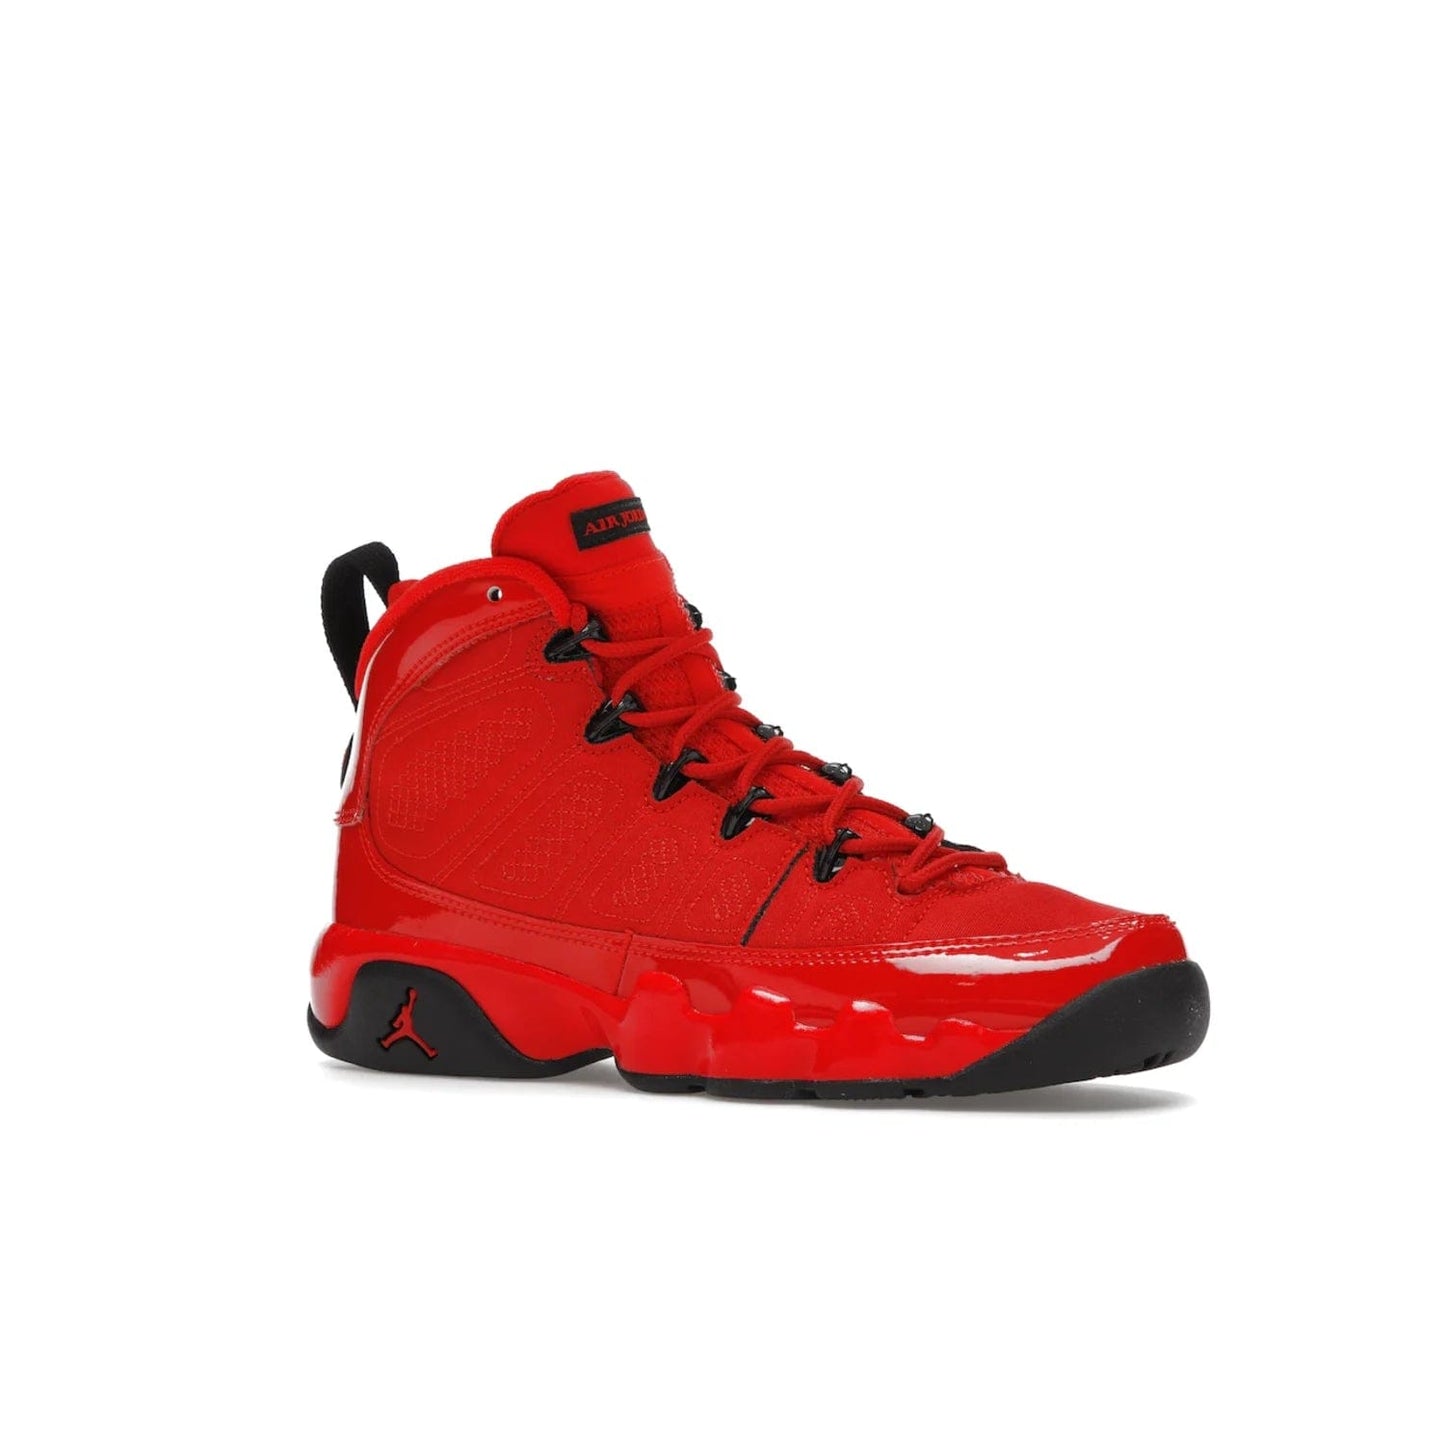 Jordan 9 Retro Chile Red (GS) - Image 4 - Only at www.BallersClubKickz.com - Introducing the Air Jordan 9 Retro Chile Red (GS), a vintage 1993 silhouette with fiery colorway. Features quilted side paneling, glossy patent leather, pull tabs, black contrast accents, and foam midsole. Launching May 2022 for $140.